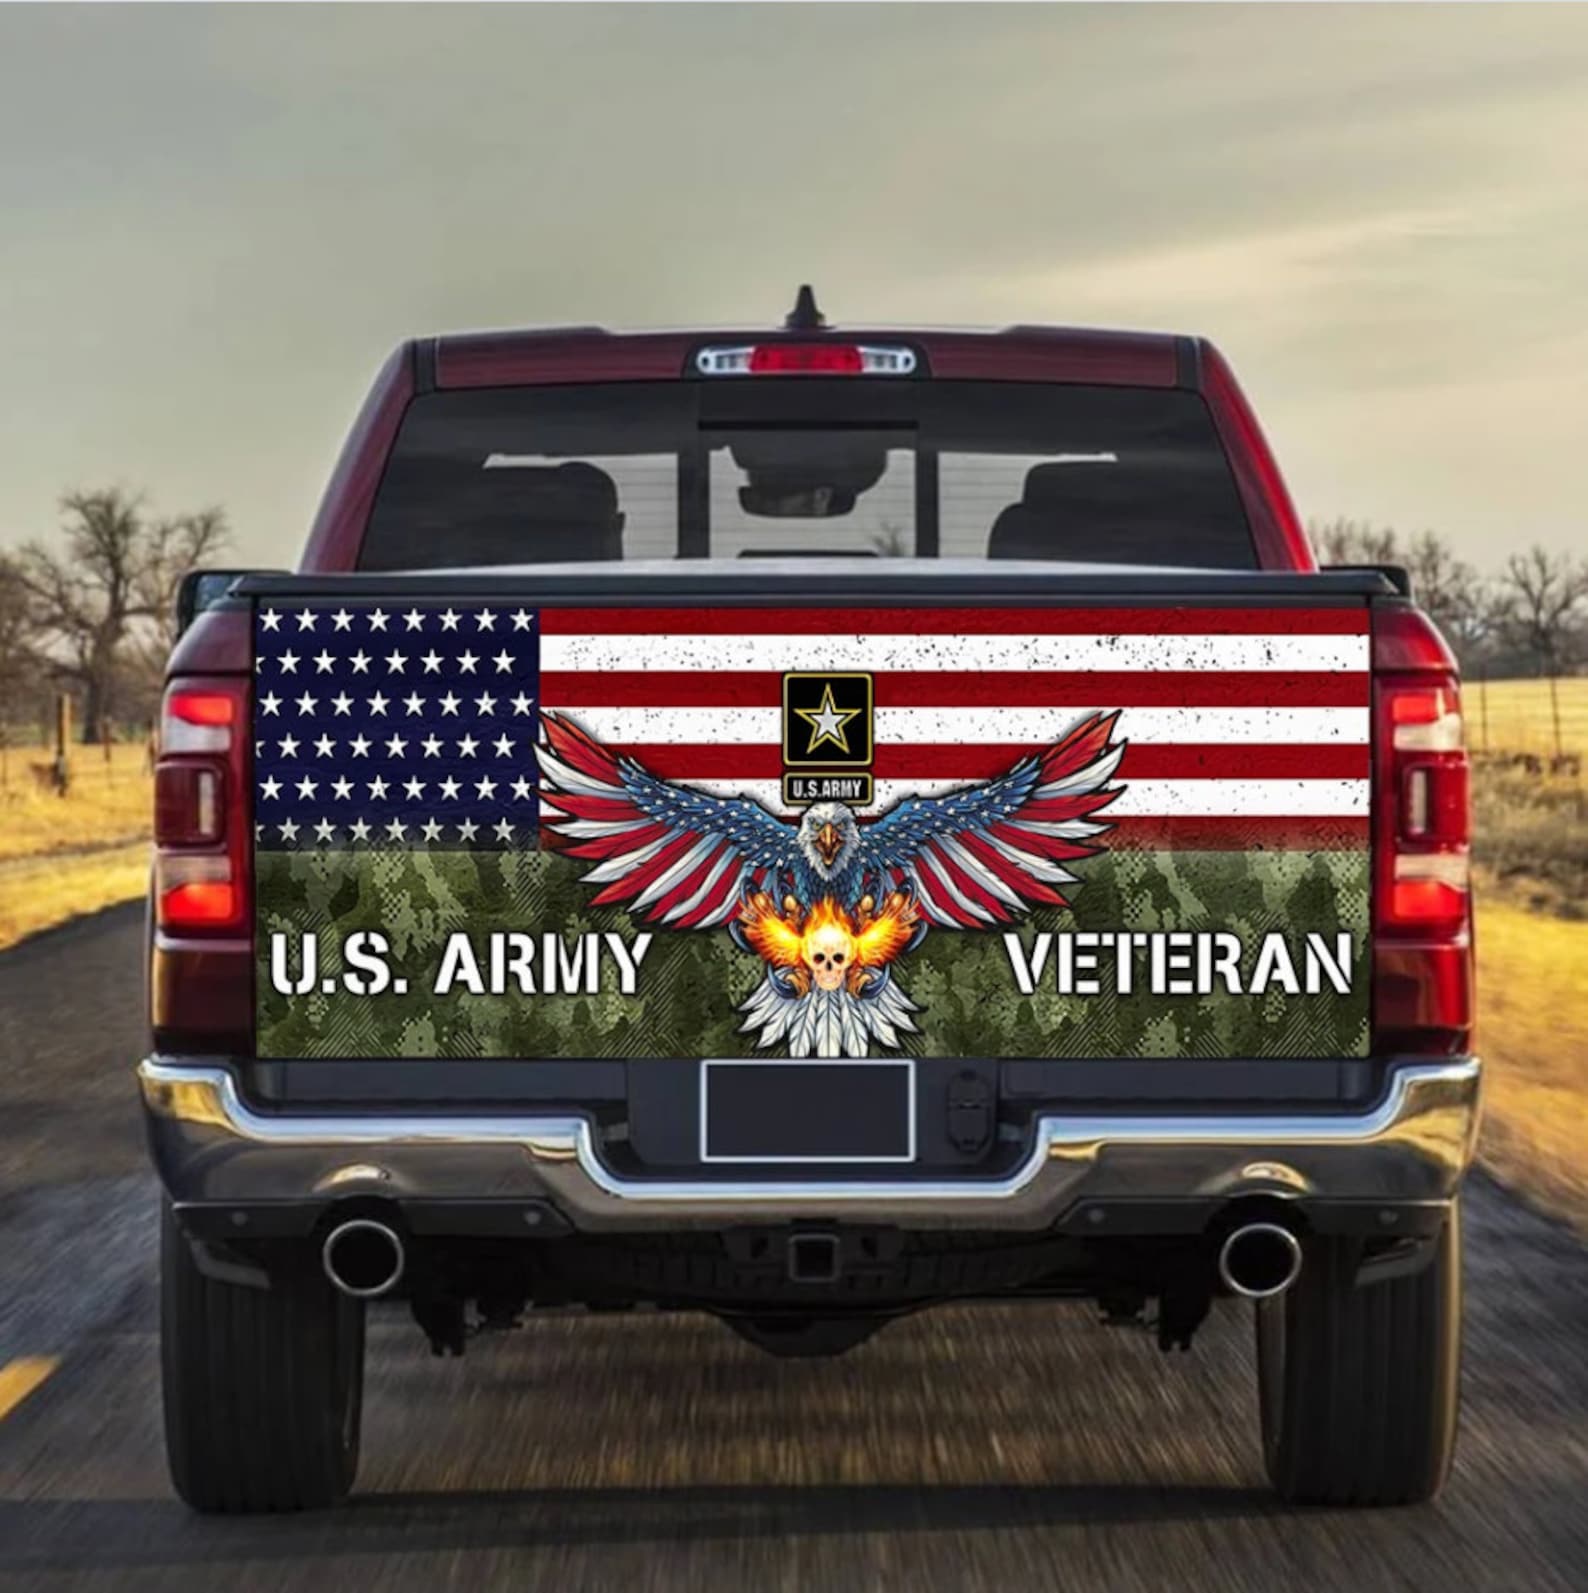 Decal Fits Cars Us Army Veteran Truck Tailgate Decal Etsy